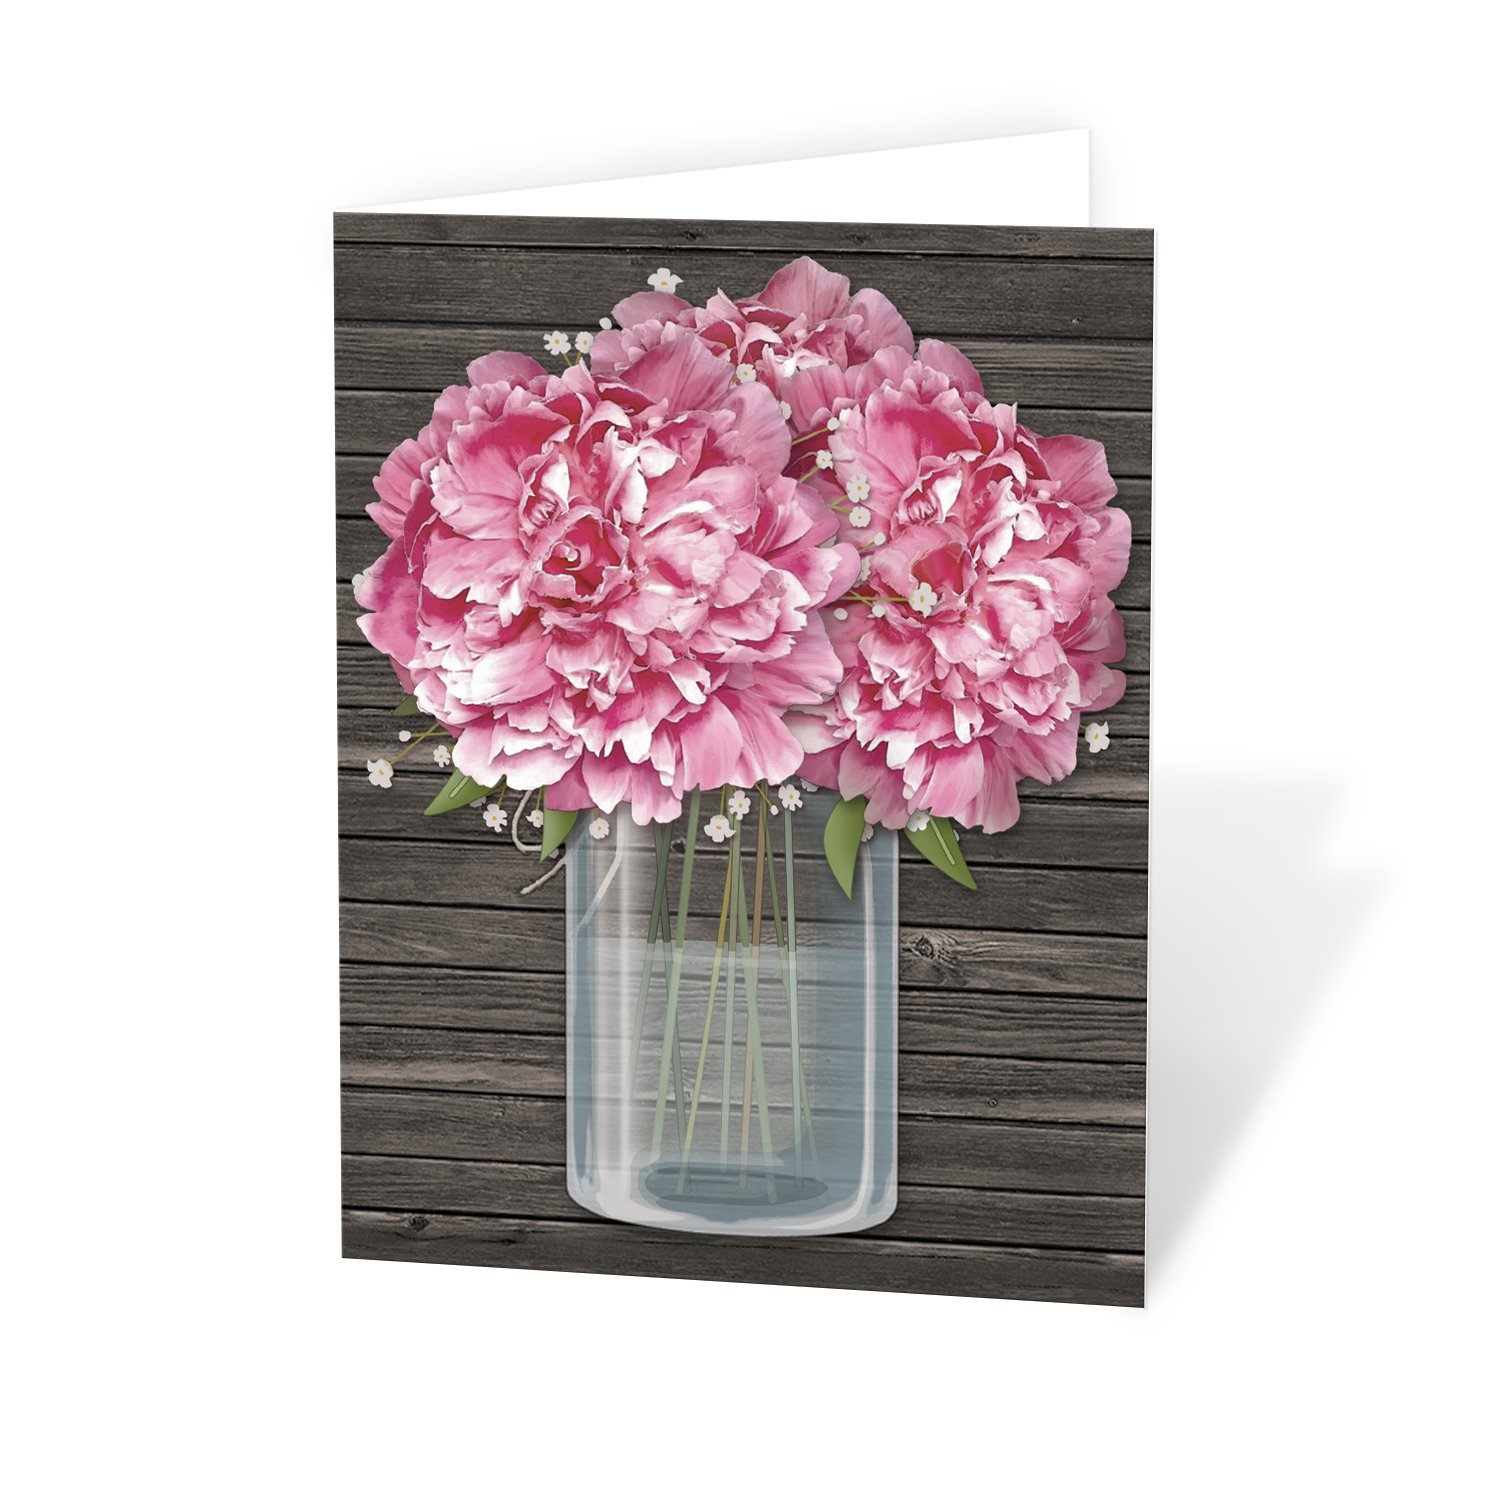 Rustic Pink Peony Wood Mason Jar Note Cards at Artistically Invited